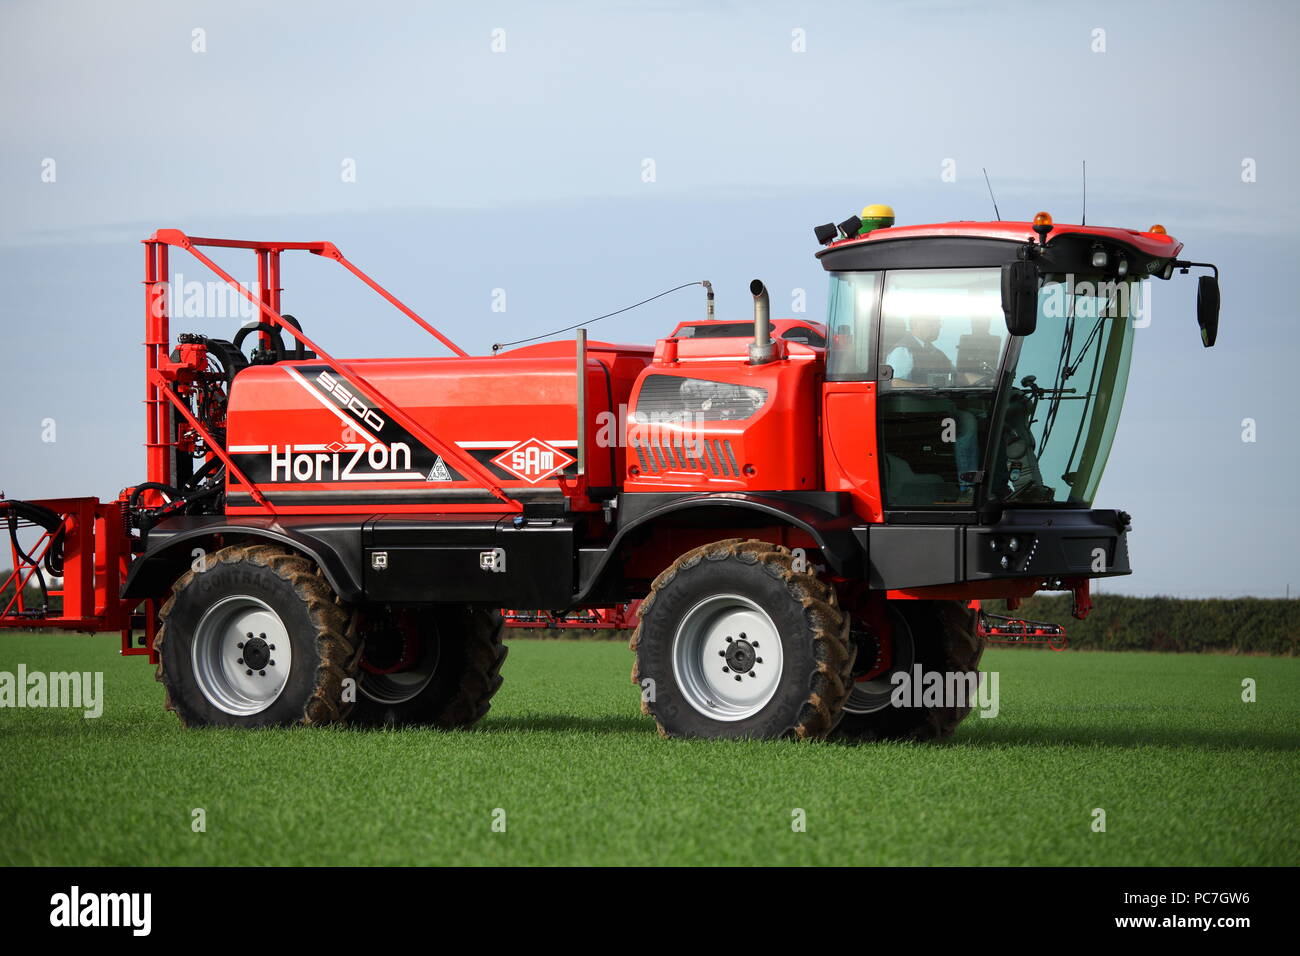 A SAM - Sands Agricultural Machinery -  self propelled crop sprayer. Seen here applying fertiliser / fertilizer to a young crop in the UK. Stock Photo